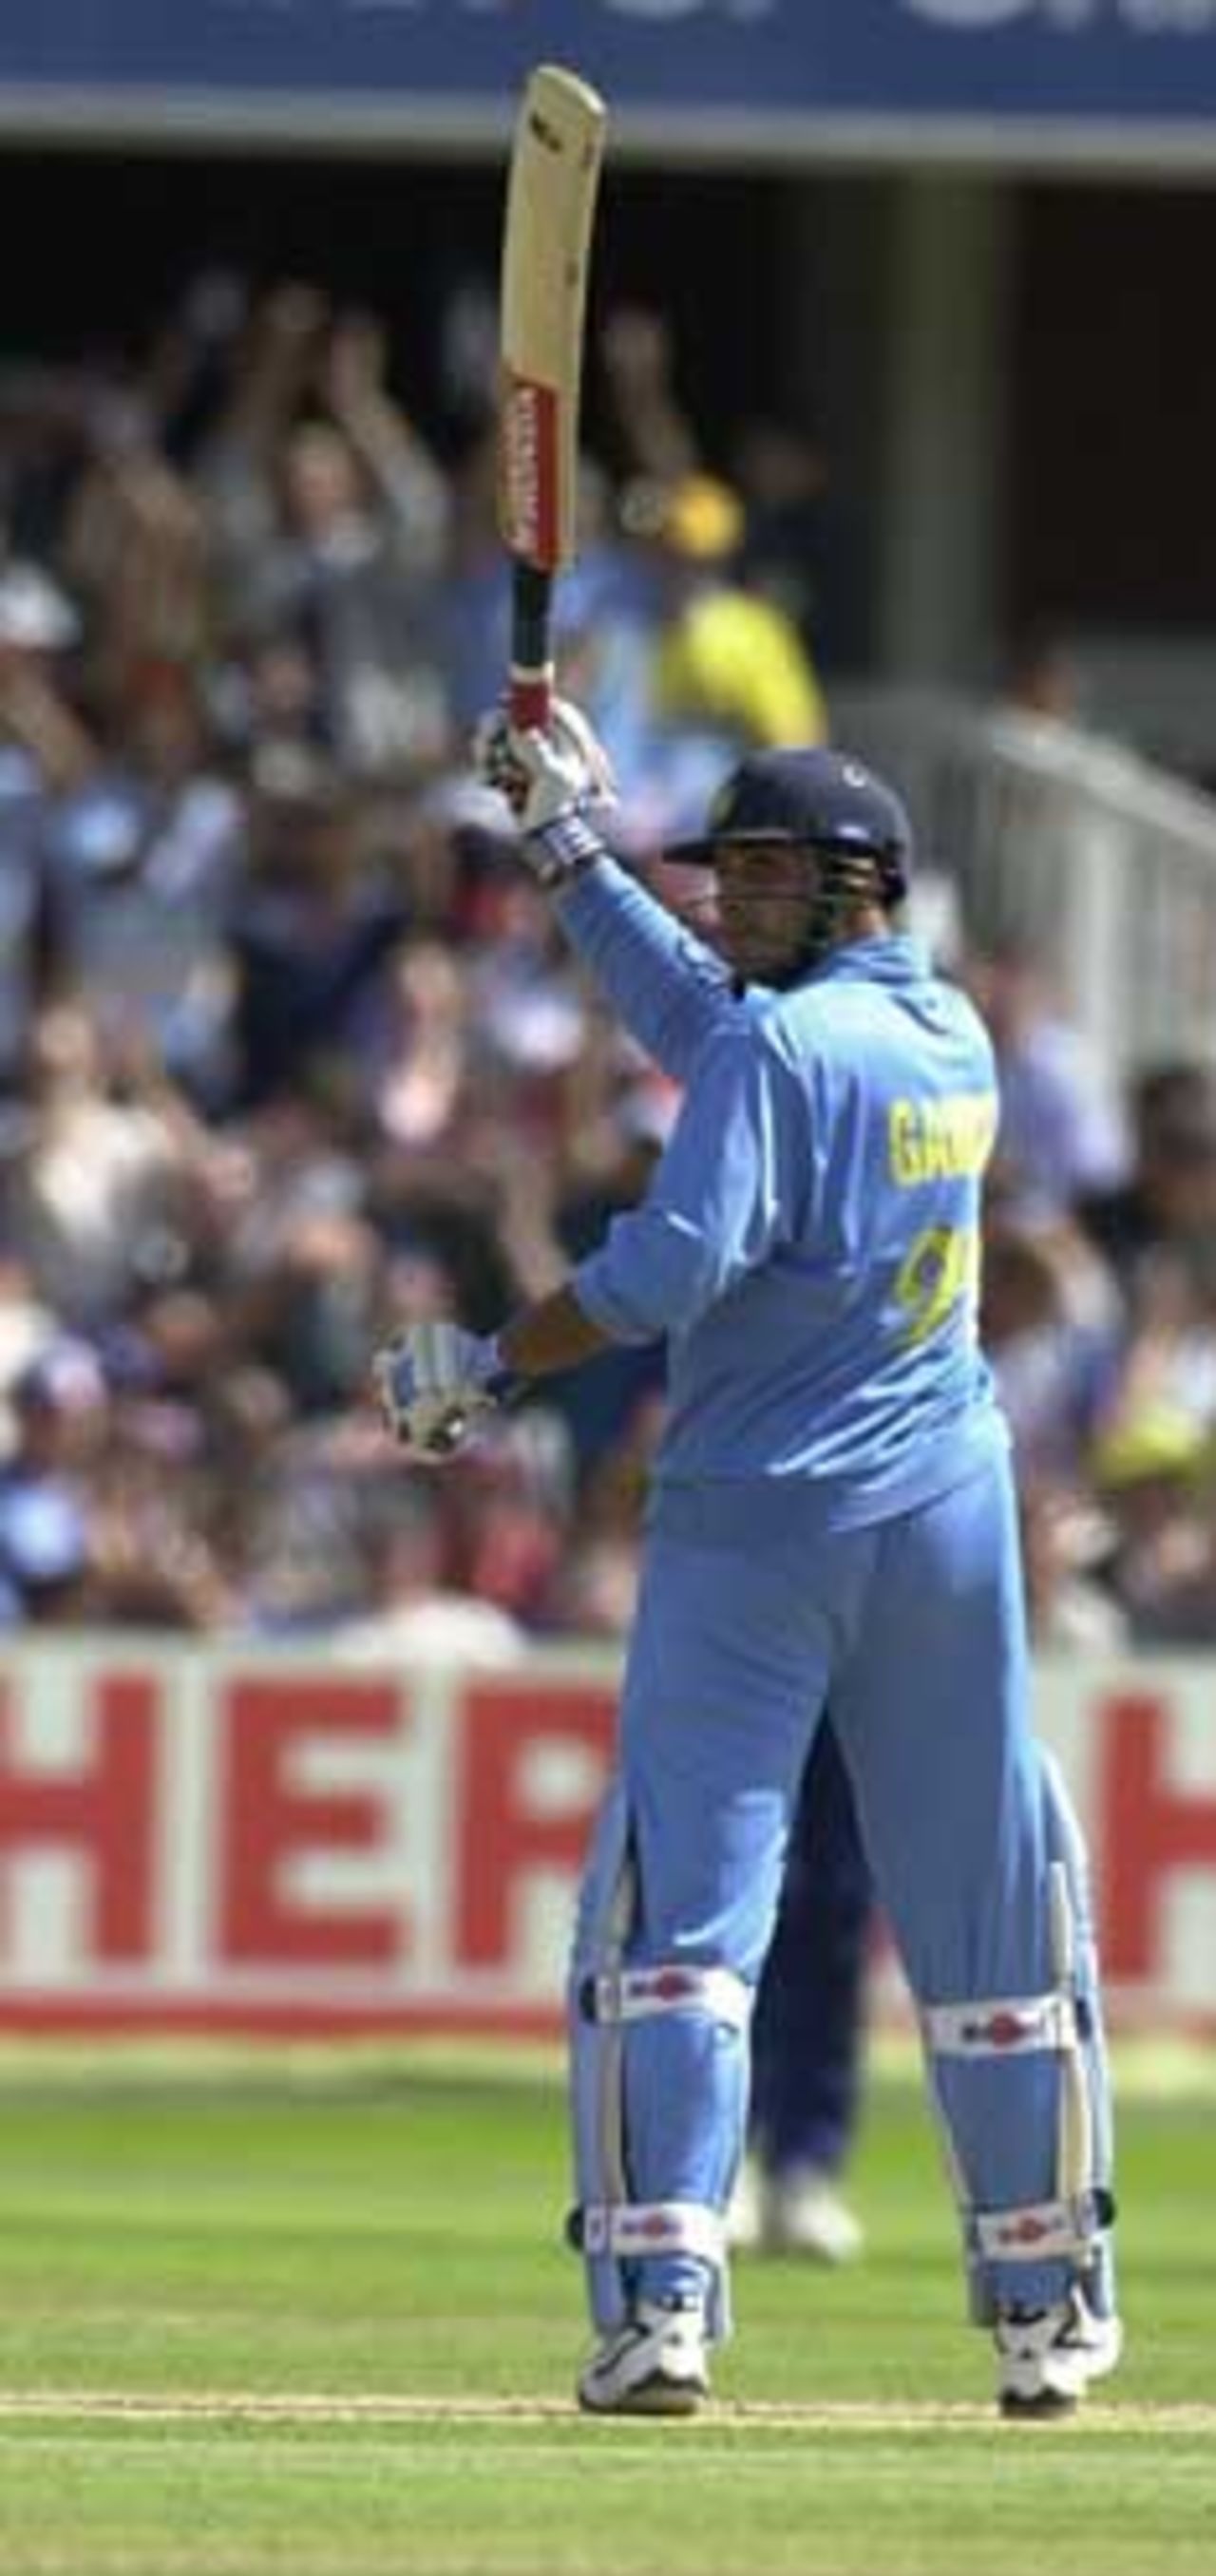 Ganguly celebrates his 50 runs for India at Lords  ground. NatWest final 2002.